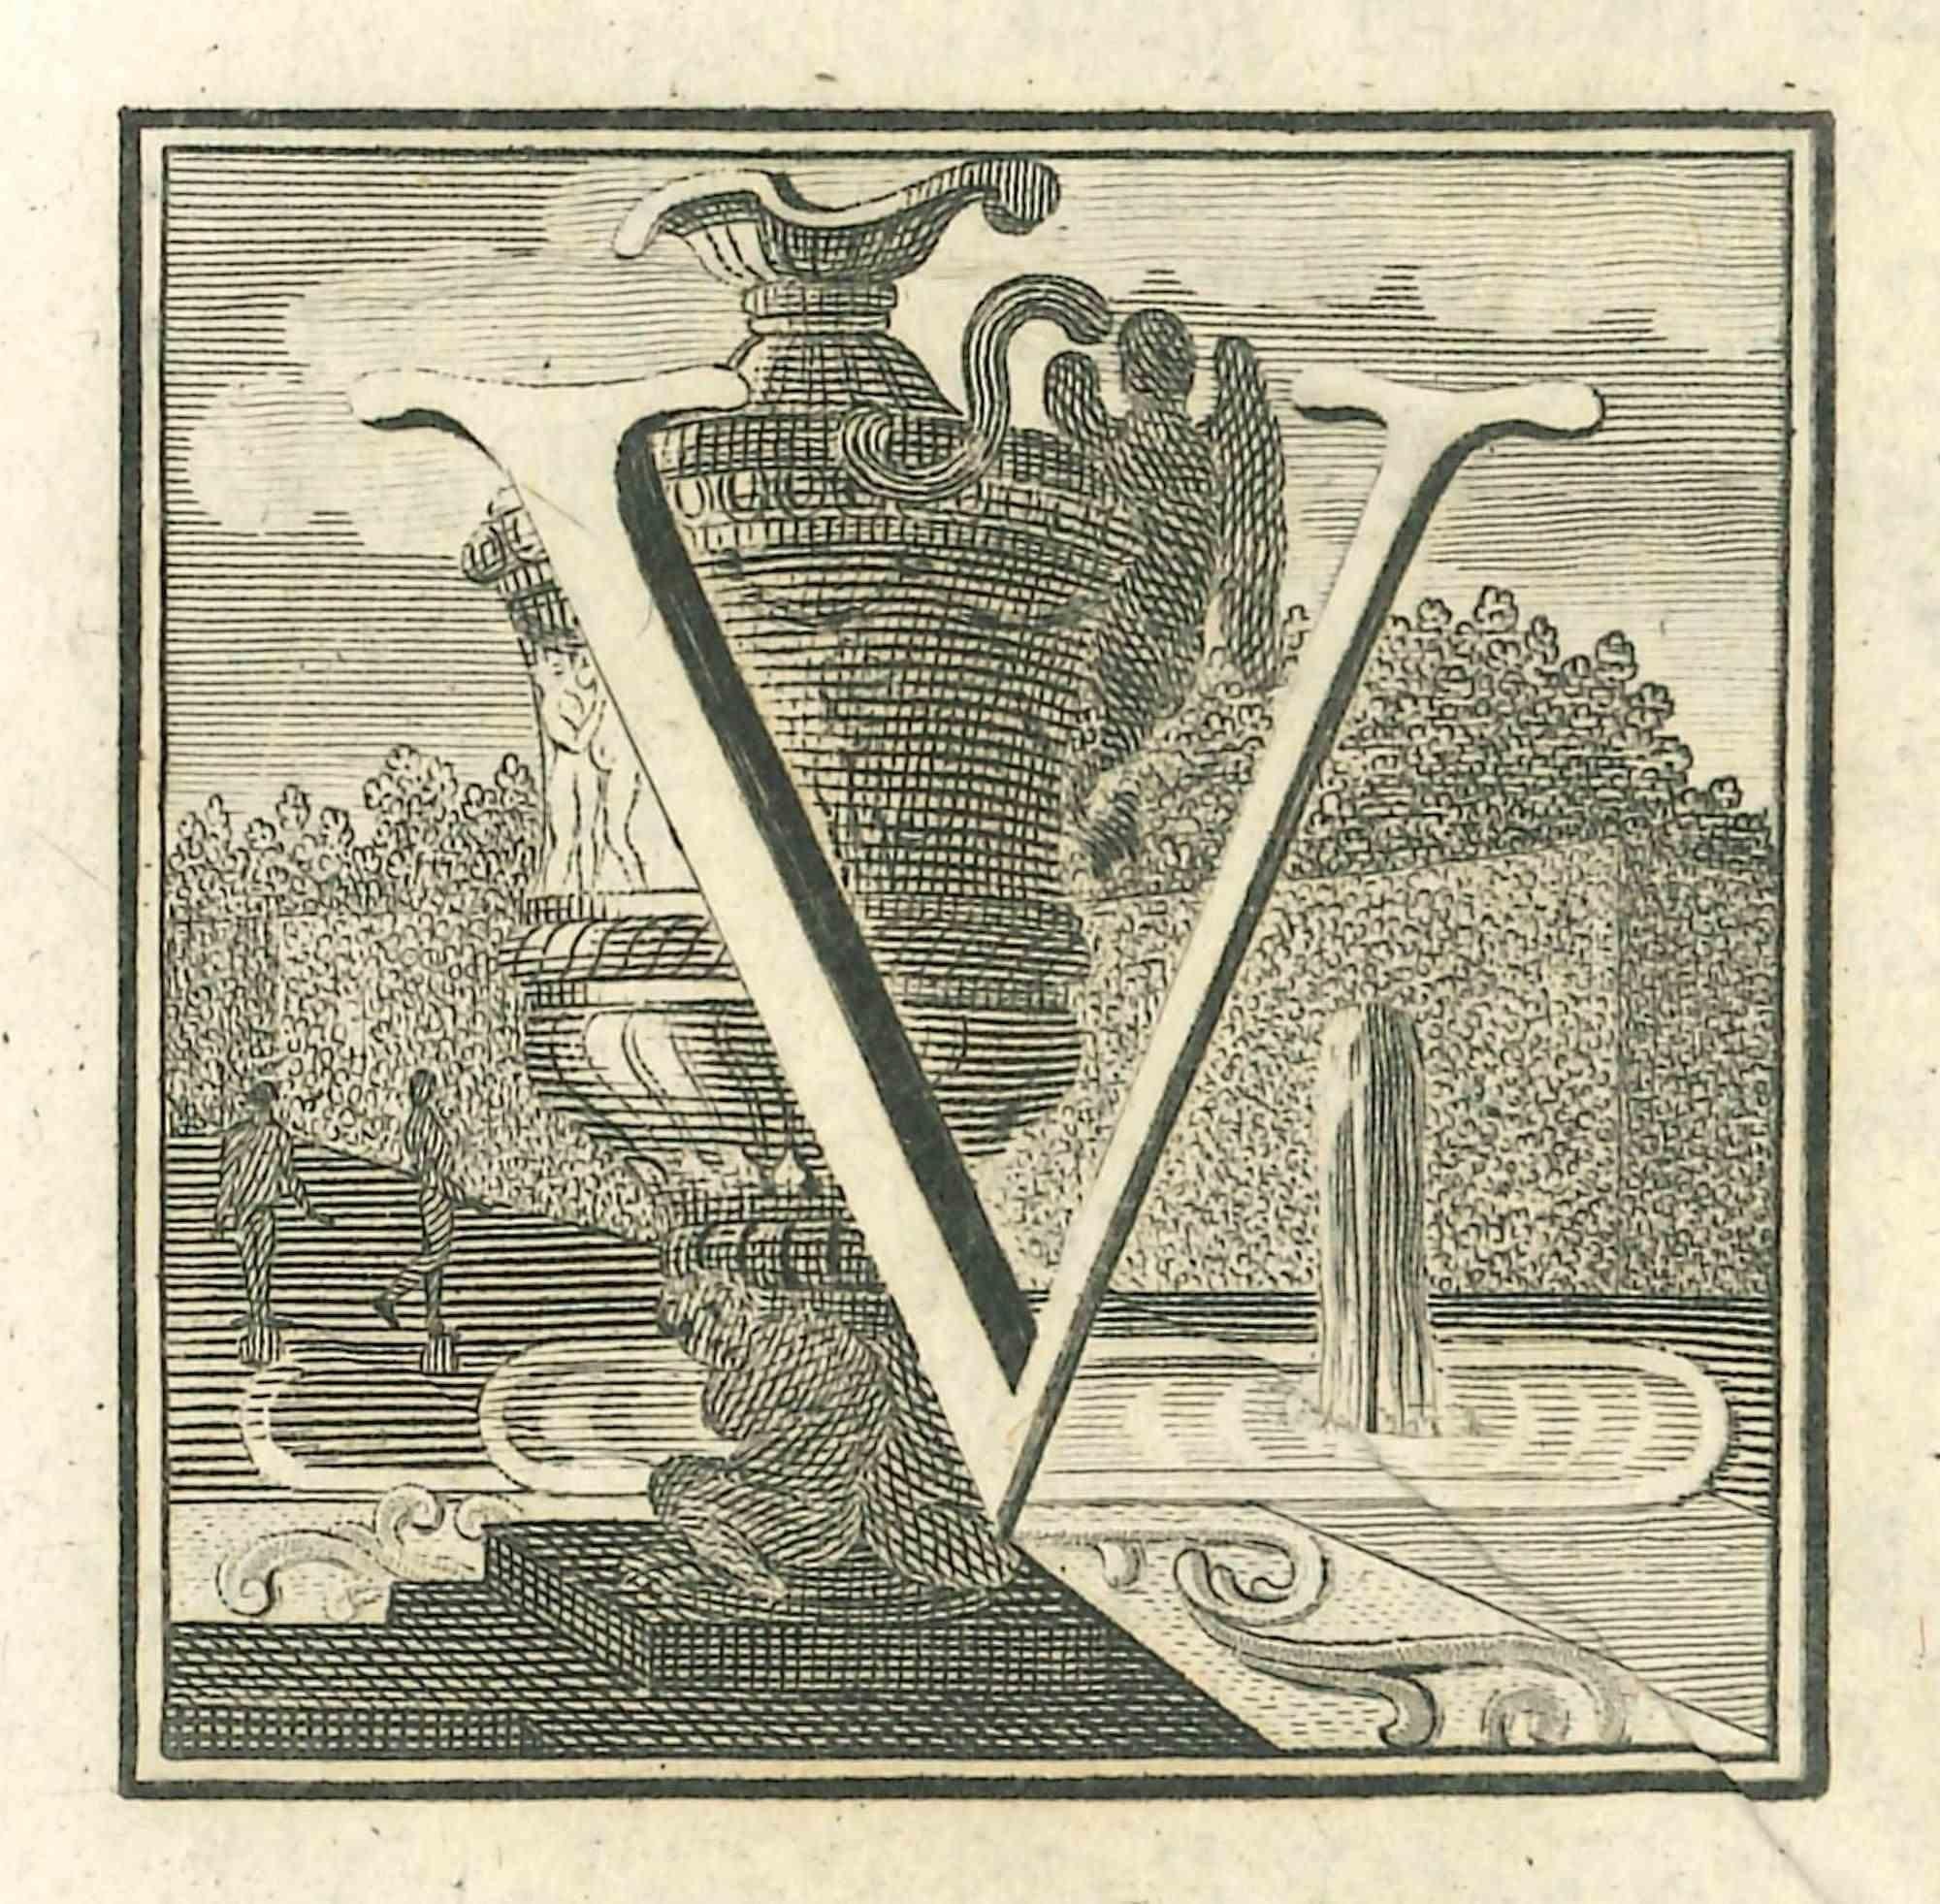 Letter V is an etching realized by Luigi Vanvitelli artist of 18th century.

Good condtions.

The etching belongs to the print suite “Antiquities of Herculaneum Exposed” (original title: “Le Antichità di Ercolano Esposte”), an eight-volume volume of